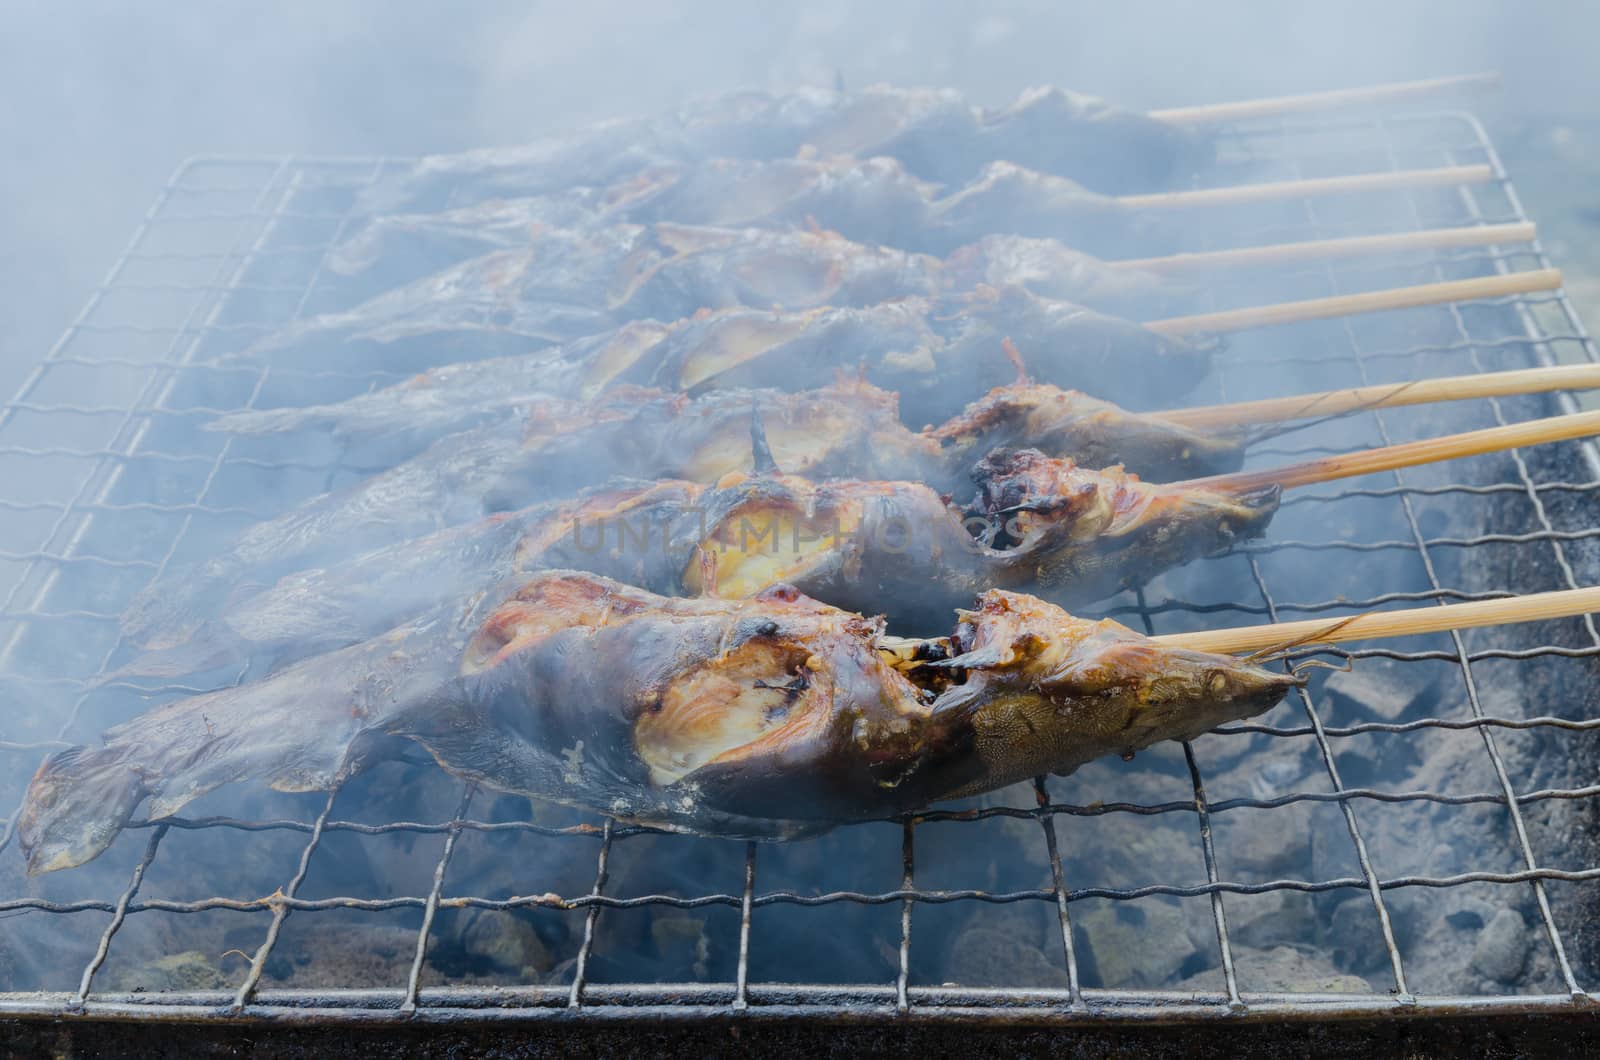 Food of thailand is Catfish grilling on the hot grating